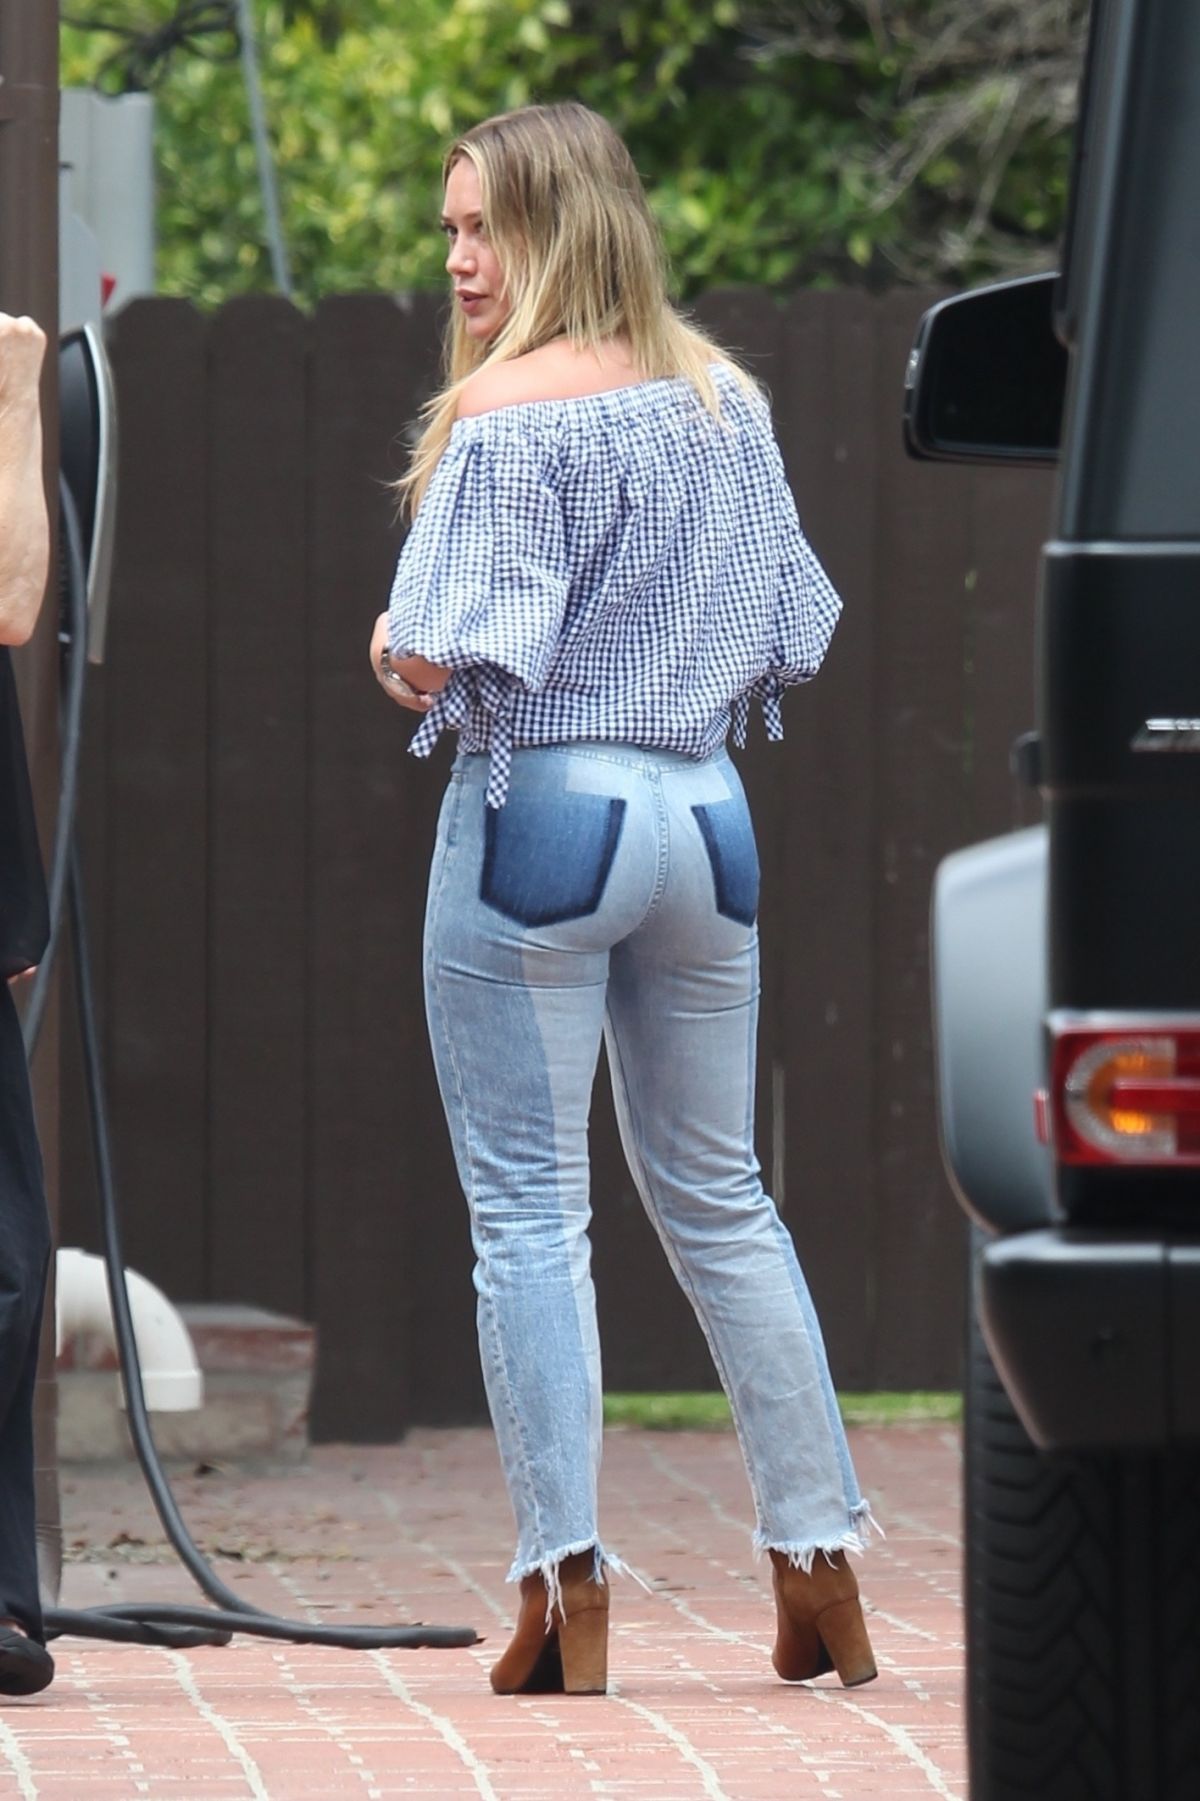 HILARY DUFF in Tight Jeans at a Friend’s House in Studio City 07/24/2017.